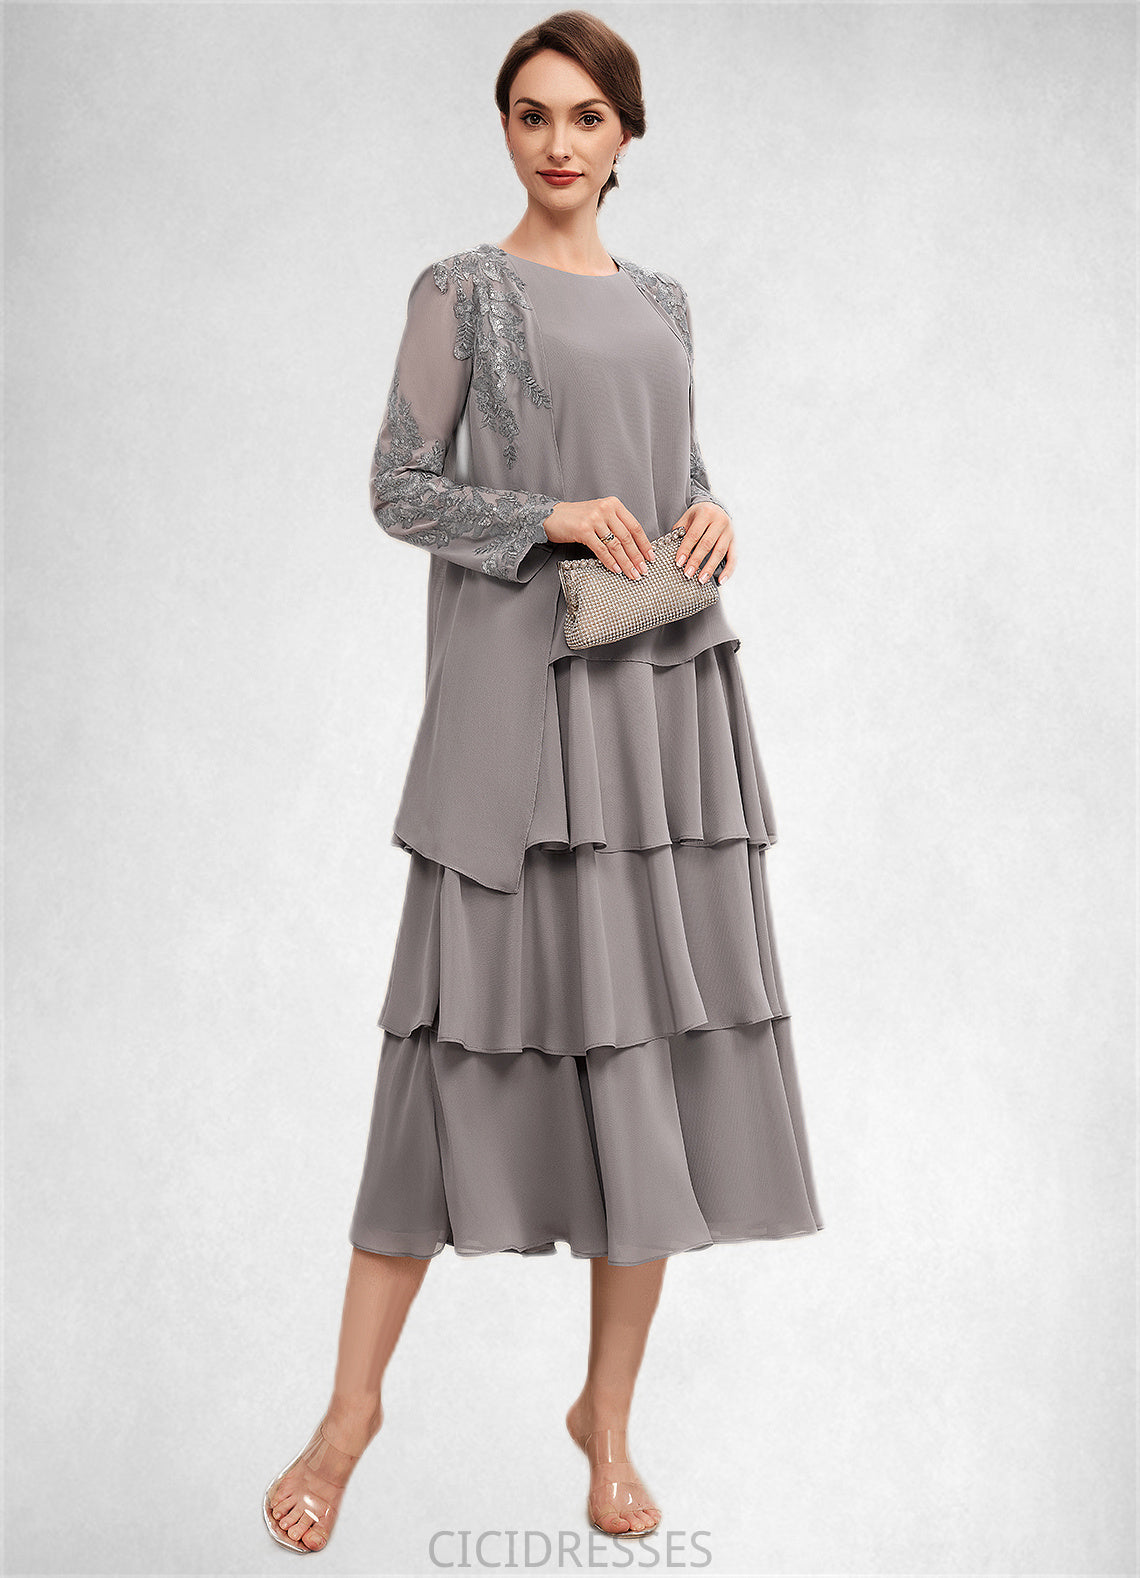 Susan A-Line Scoop Neck Tea-Length Chiffon Mother of the Bride Dress With Cascading Ruffles CIC8126P0014603